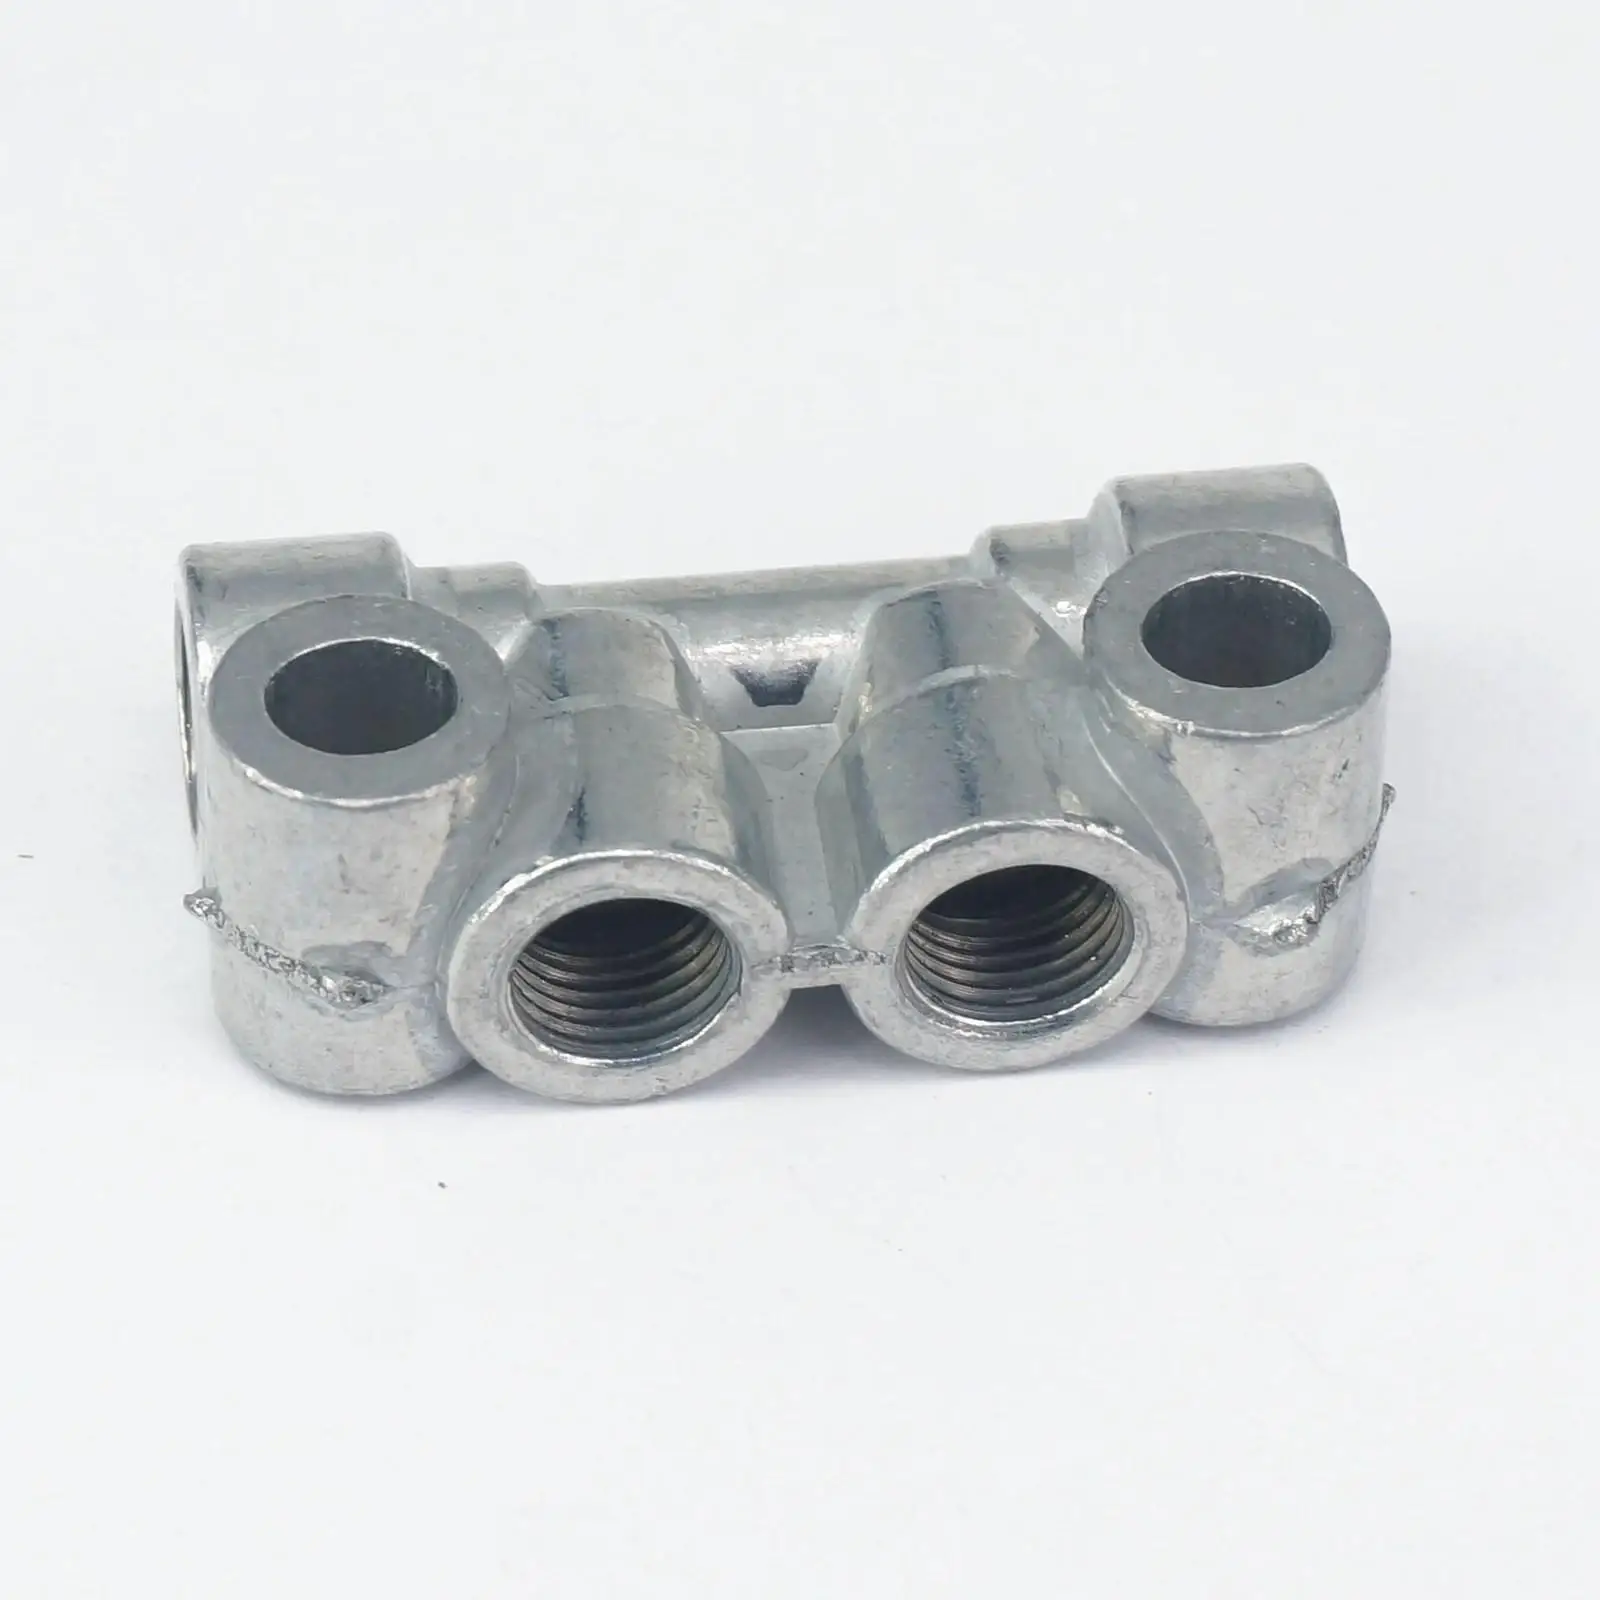 1/8" BSP female Thread 4 way Aluminum Lube Oil Piston Distributor Value Manifold Block for centralized lubrication system